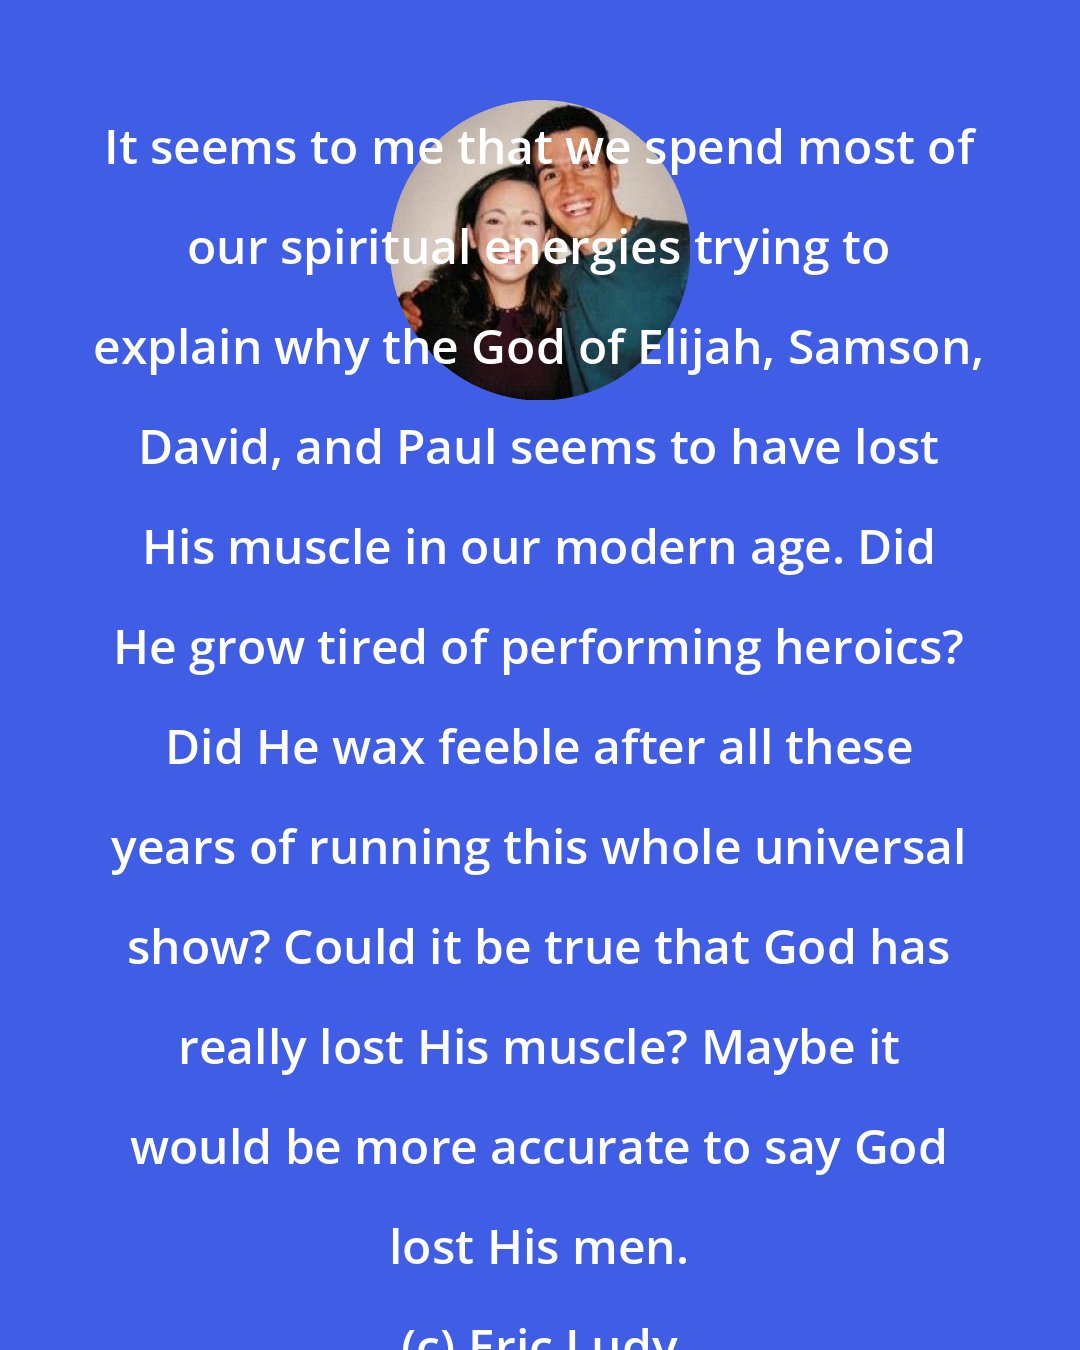 Eric Ludy: It seems to me that we spend most of our spiritual energies trying to explain why the God of Elijah, Samson, David, and Paul seems to have lost His muscle in our modern age. Did He grow tired of performing heroics? Did He wax feeble after all these years of running this whole universal show? Could it be true that God has really lost His muscle? Maybe it would be more accurate to say God lost His men.